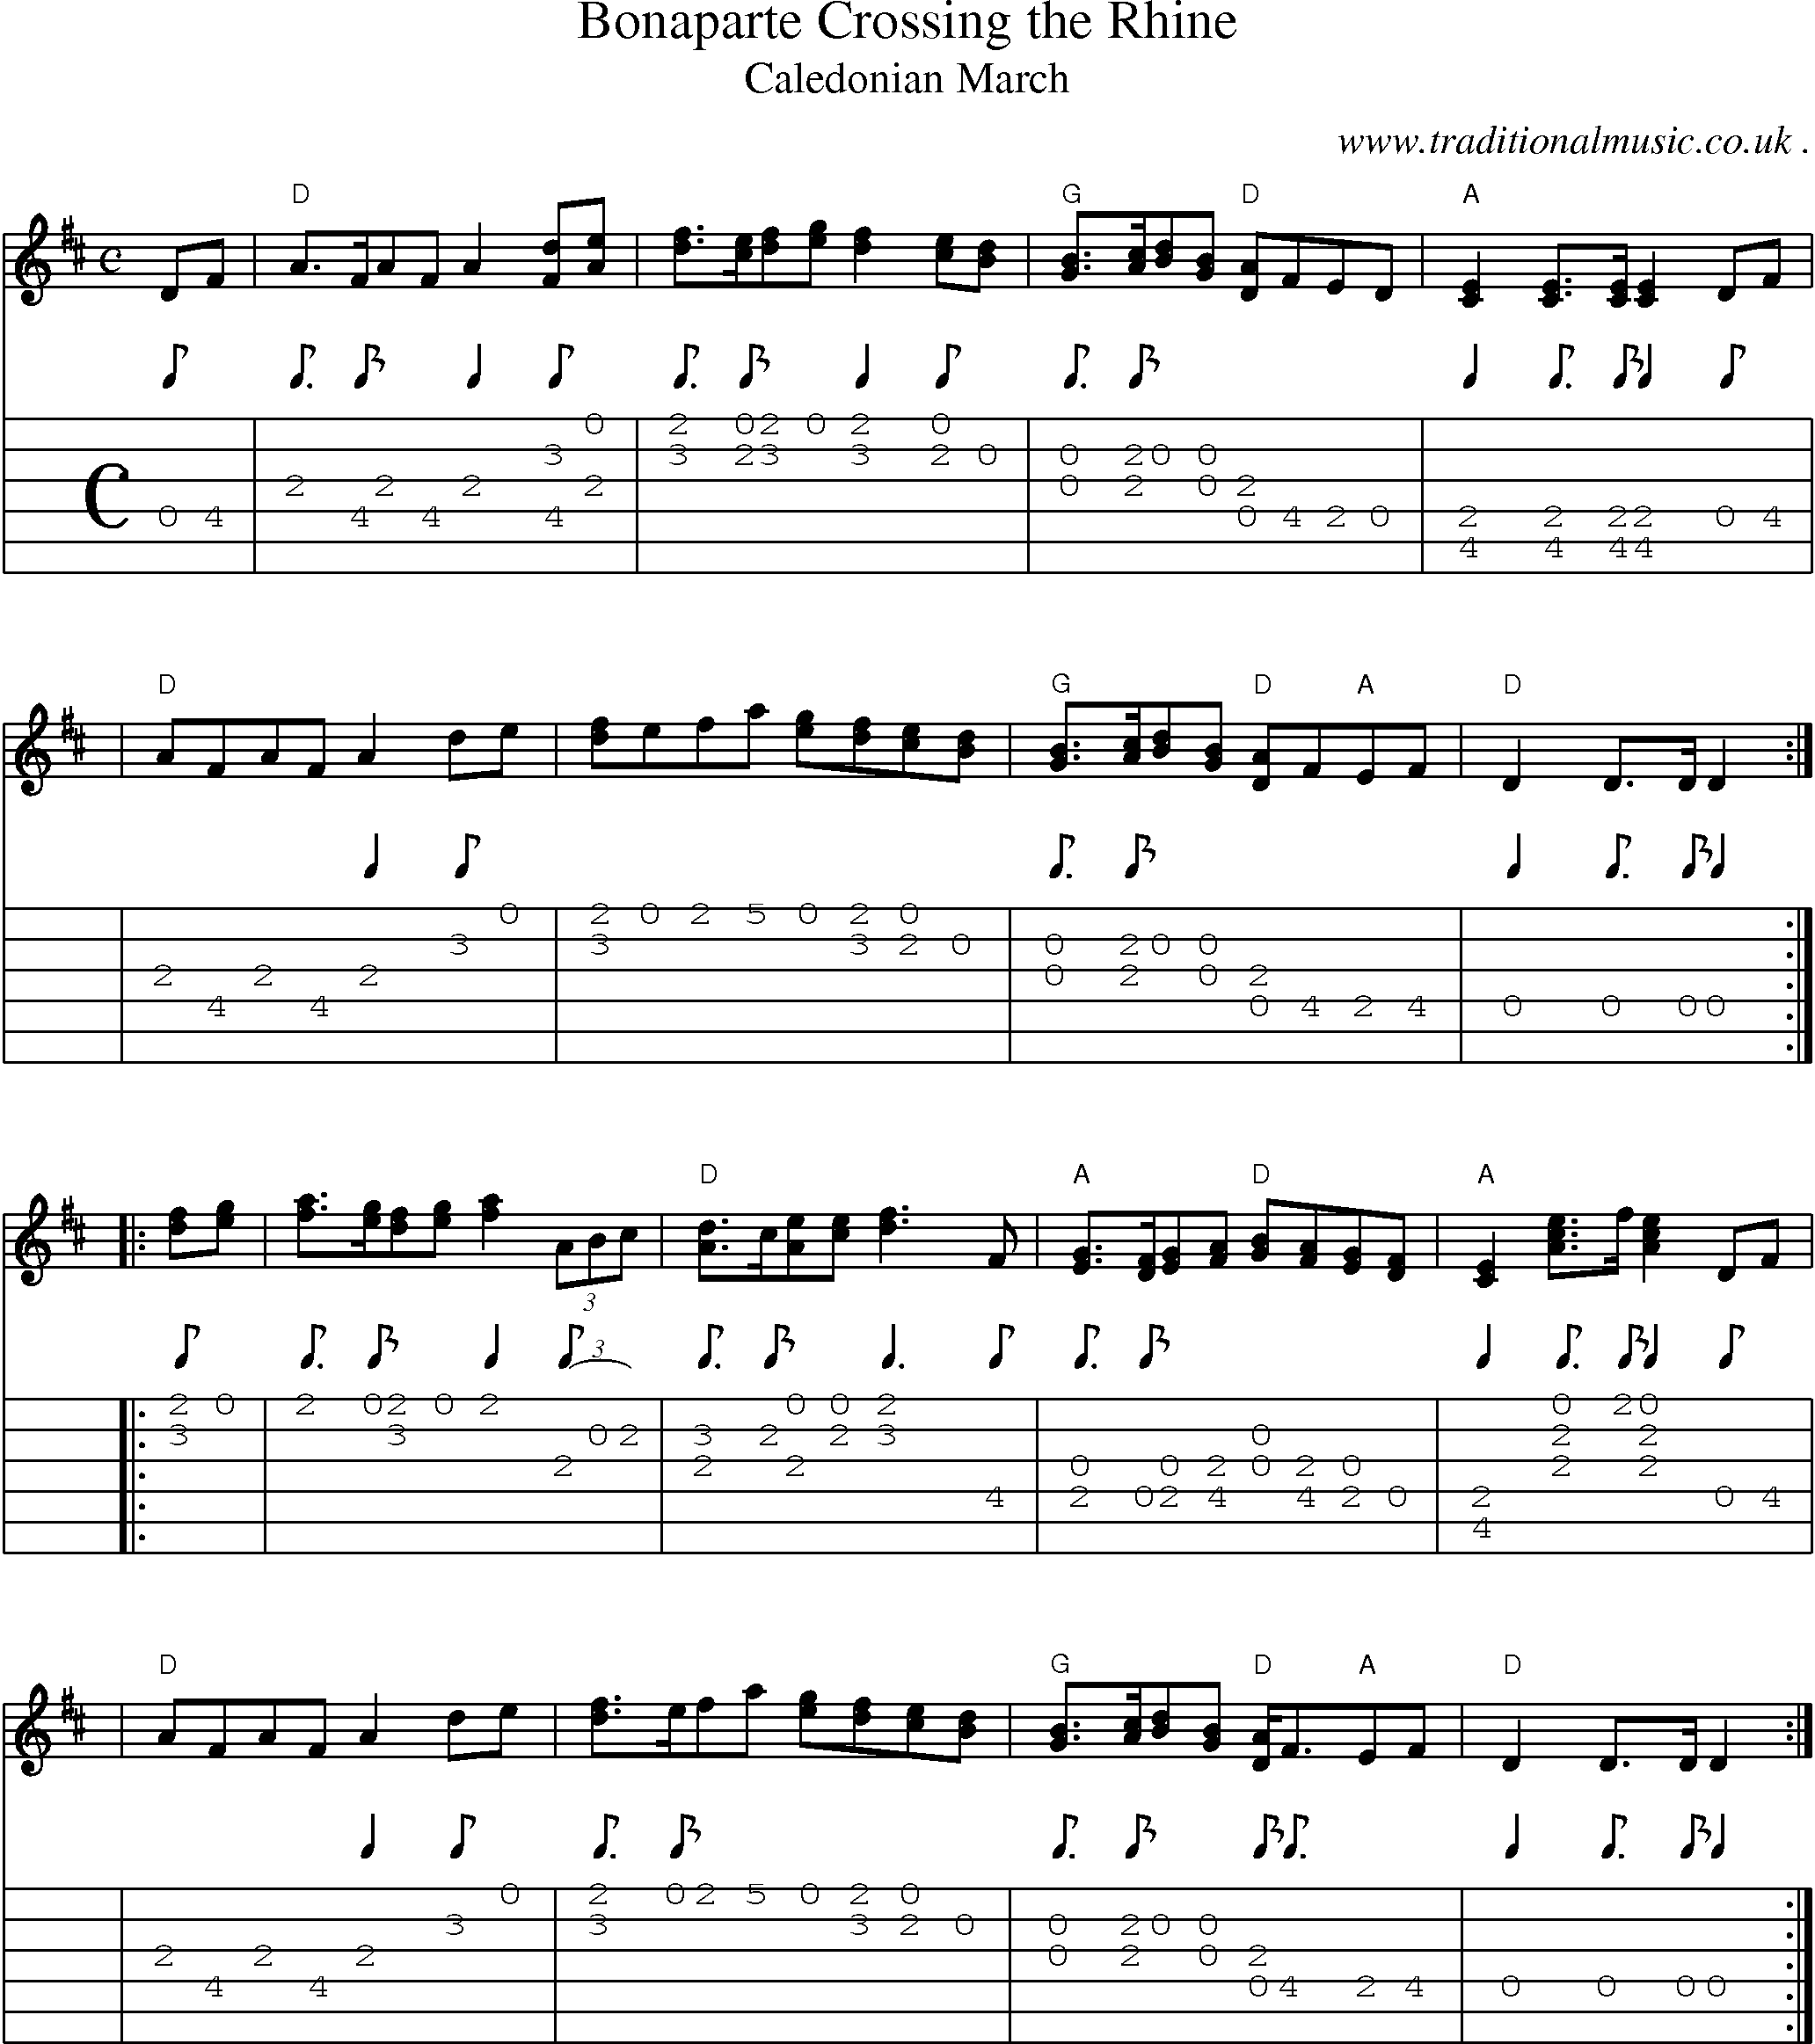 Sheet-music  score, Chords and Guitar Tabs for Bonaparte Crossing The Rhine